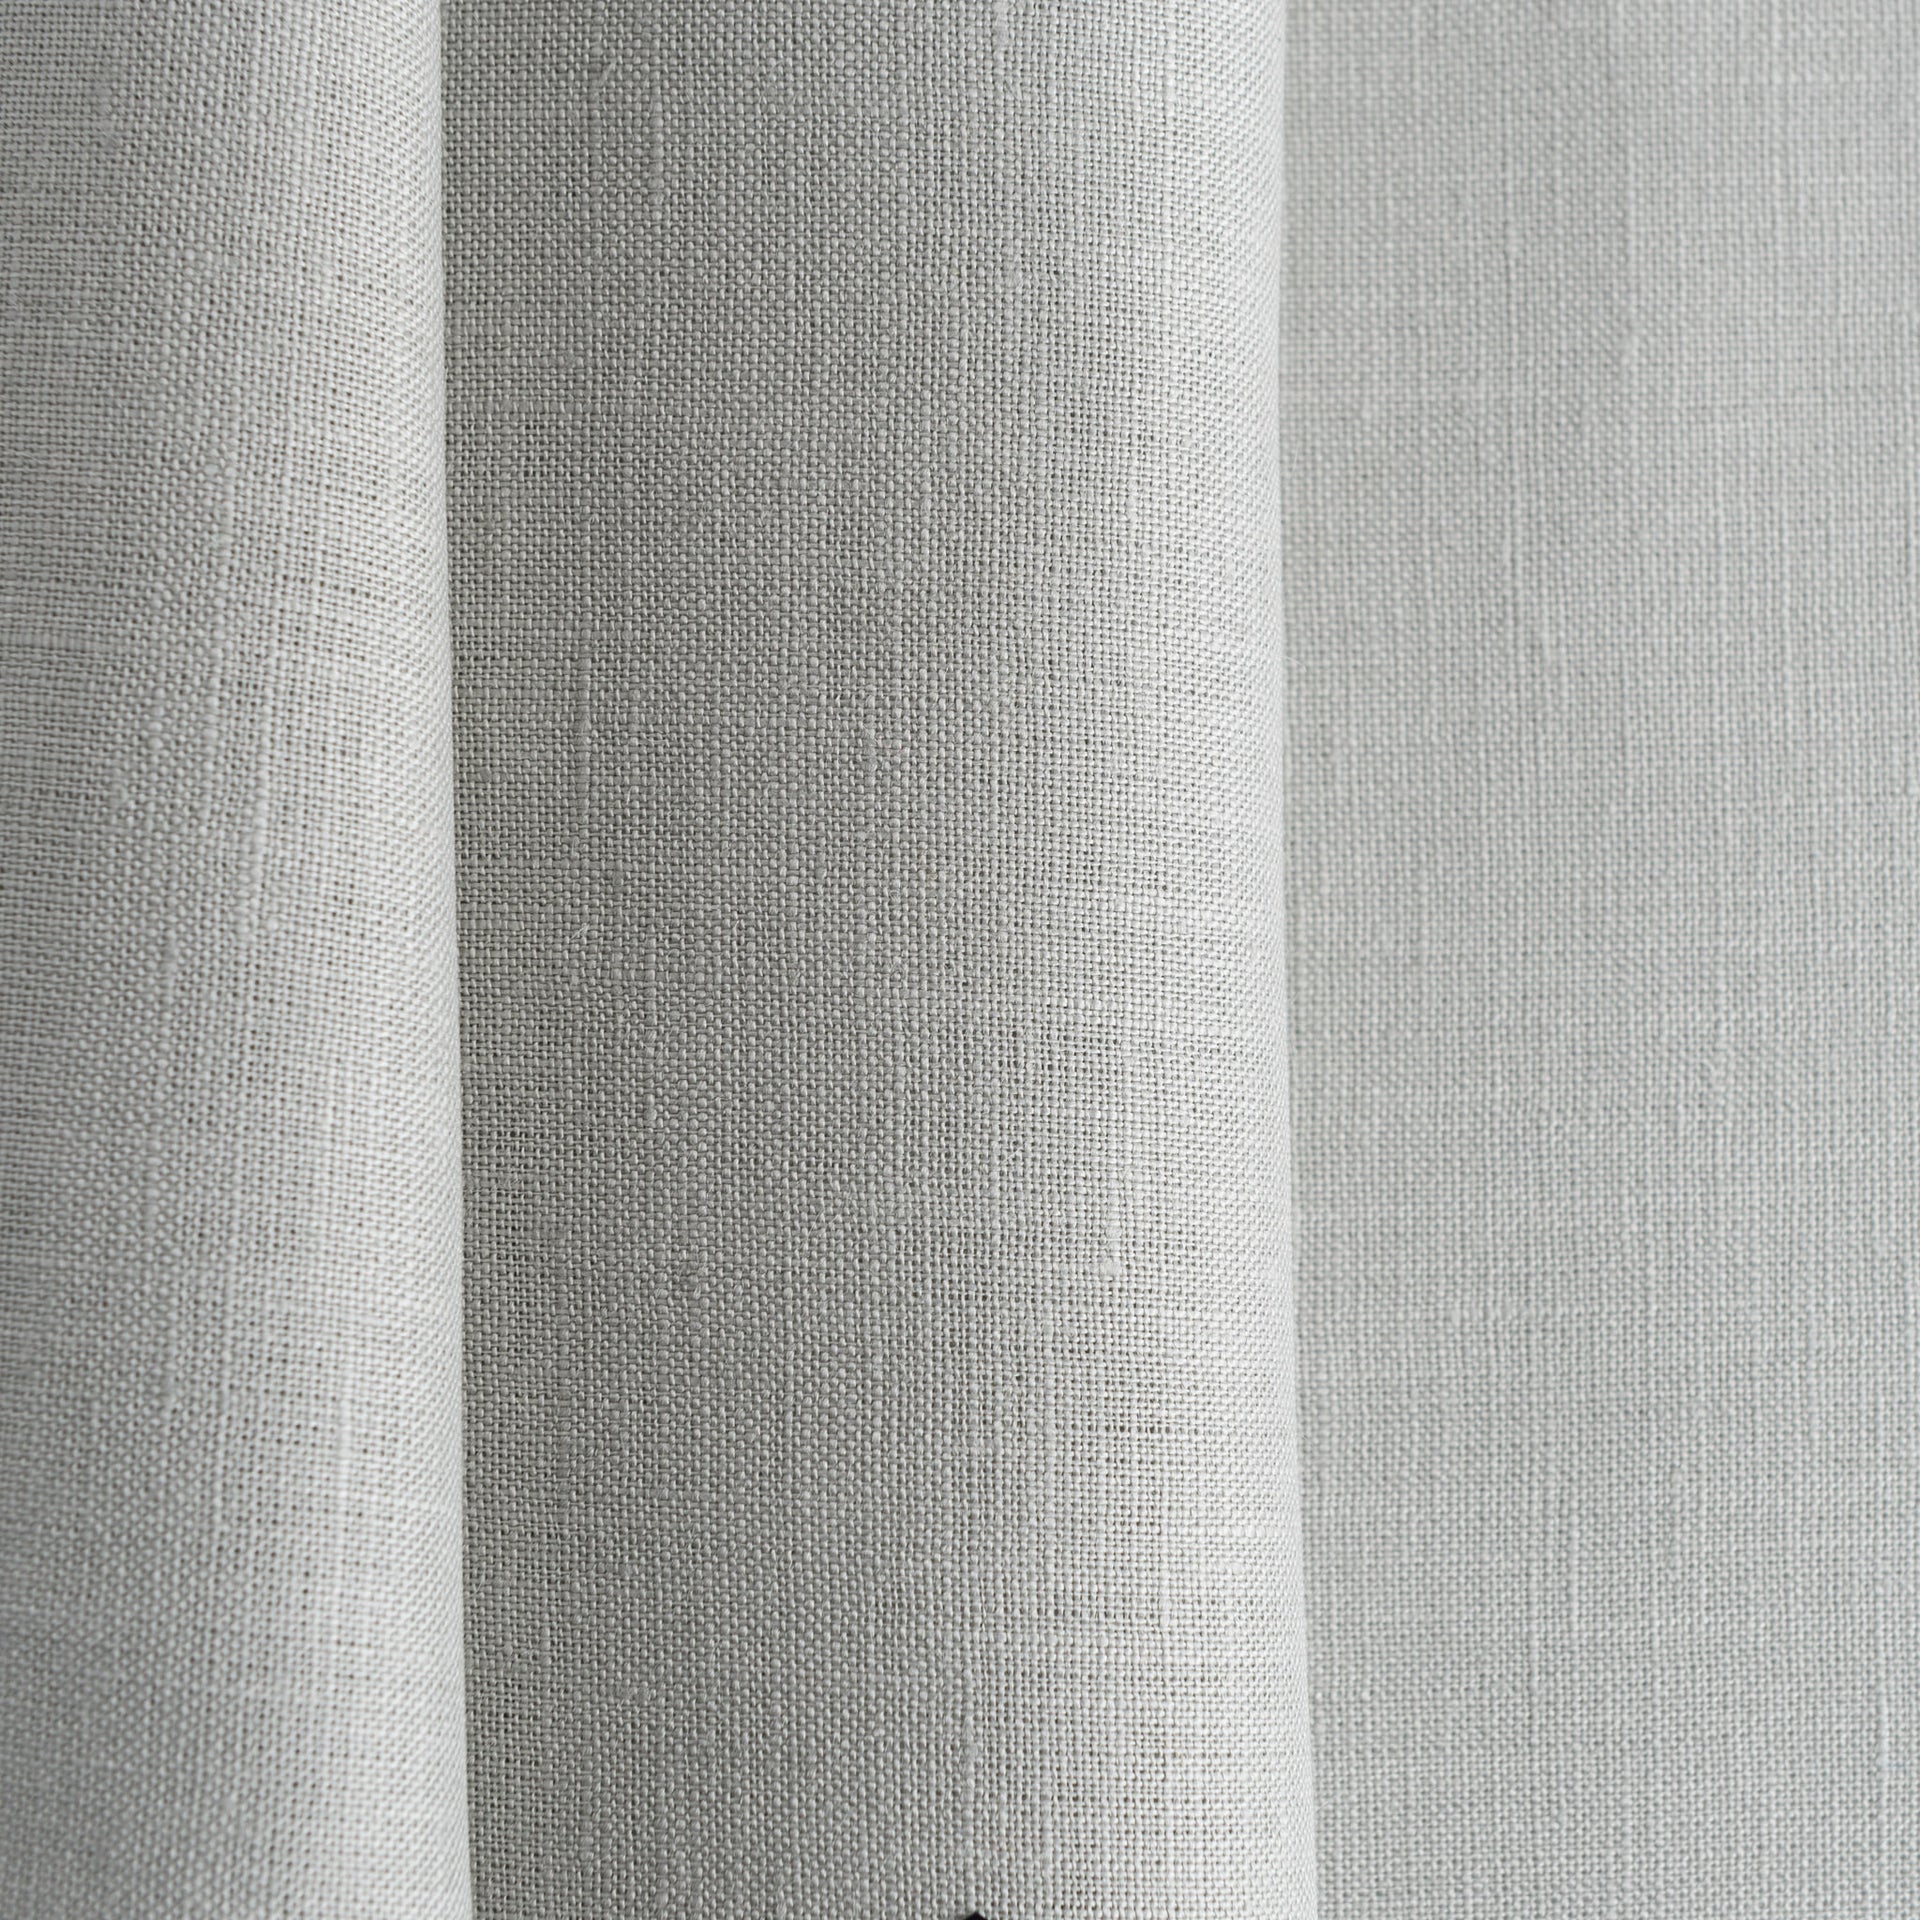 S-Fold Grey Linen Curtain Panel with Cotton Lining